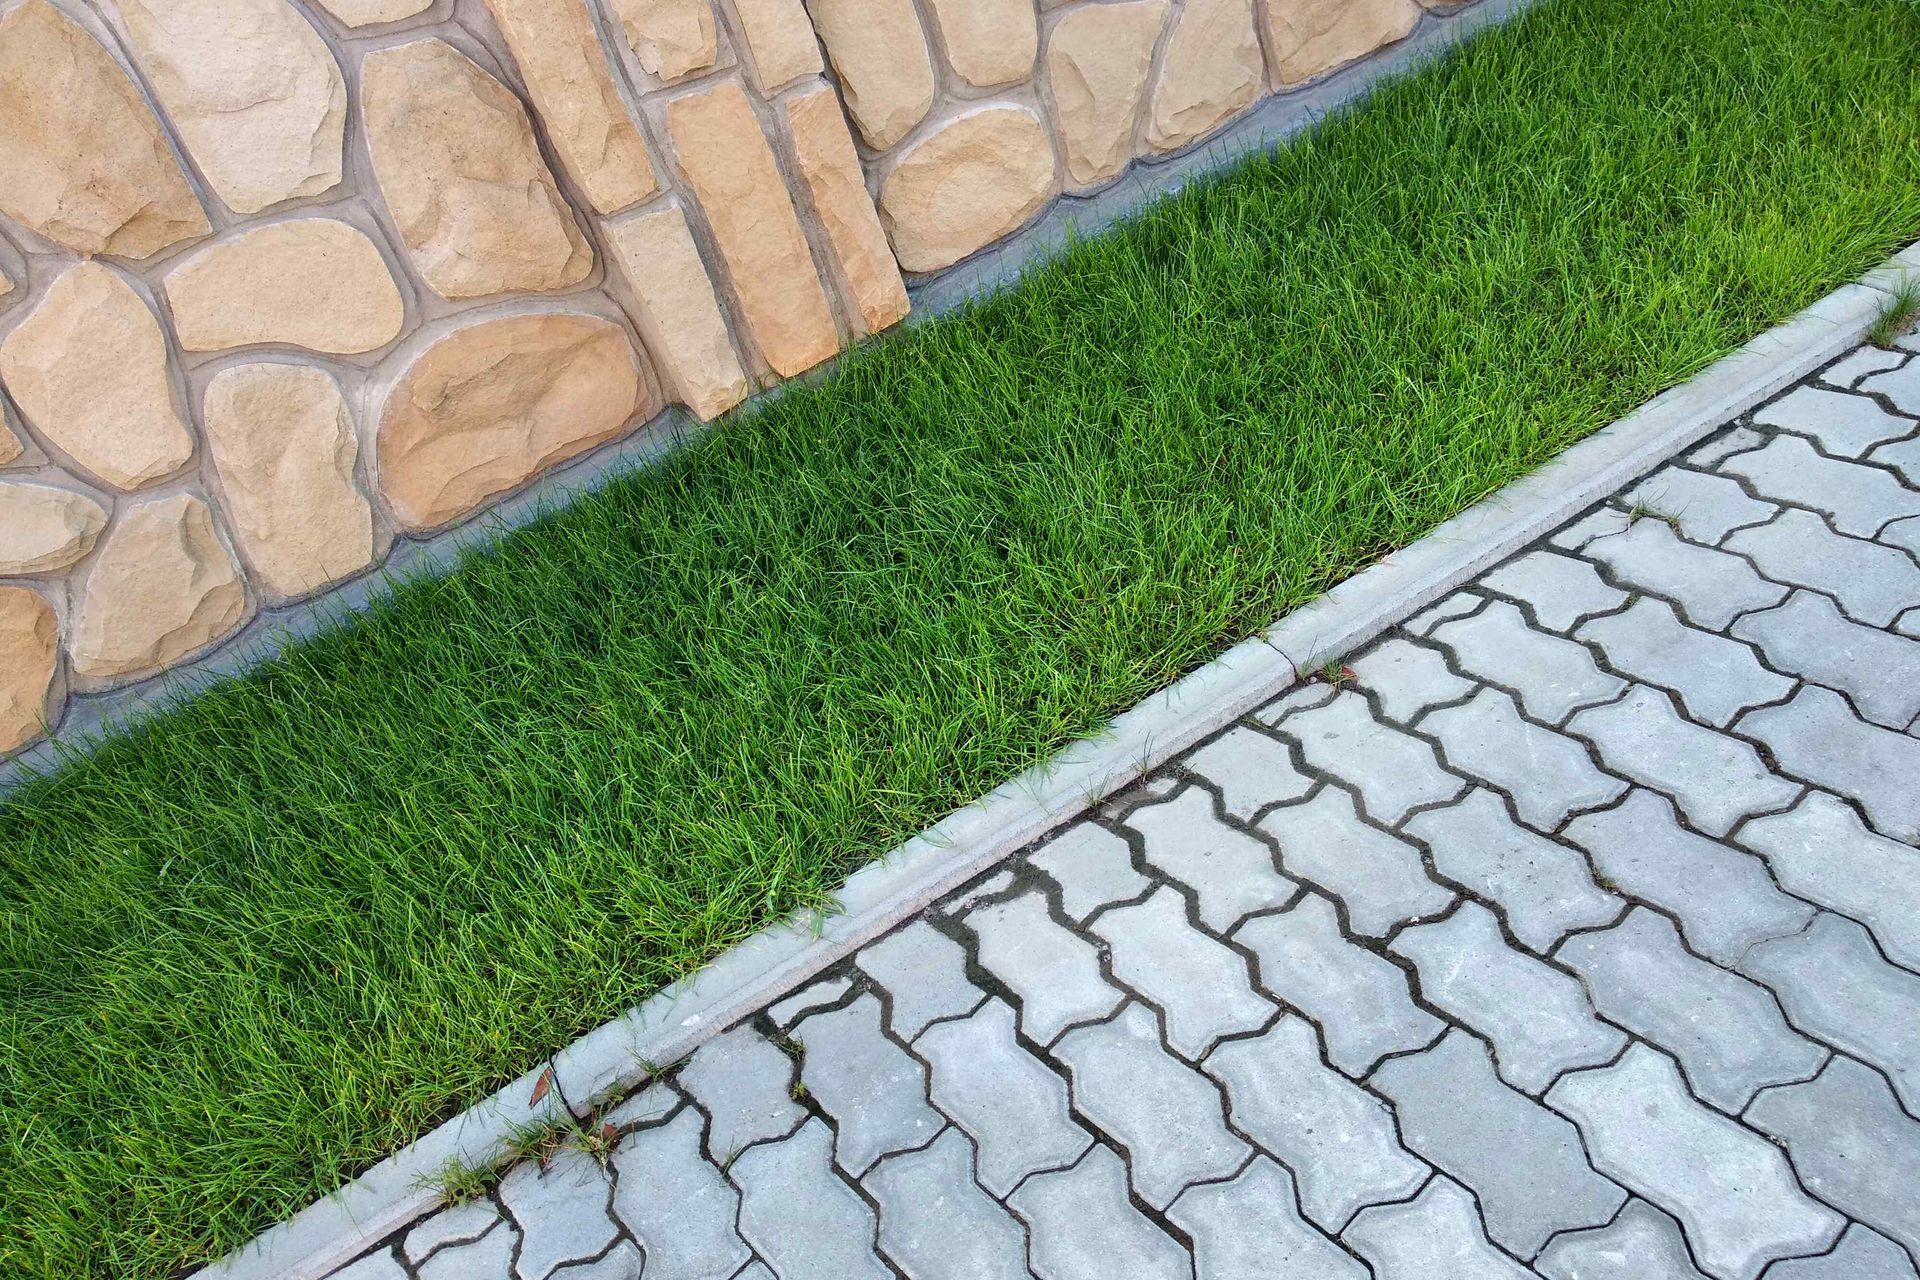 Brick Paver Walkway With Artificial Turf